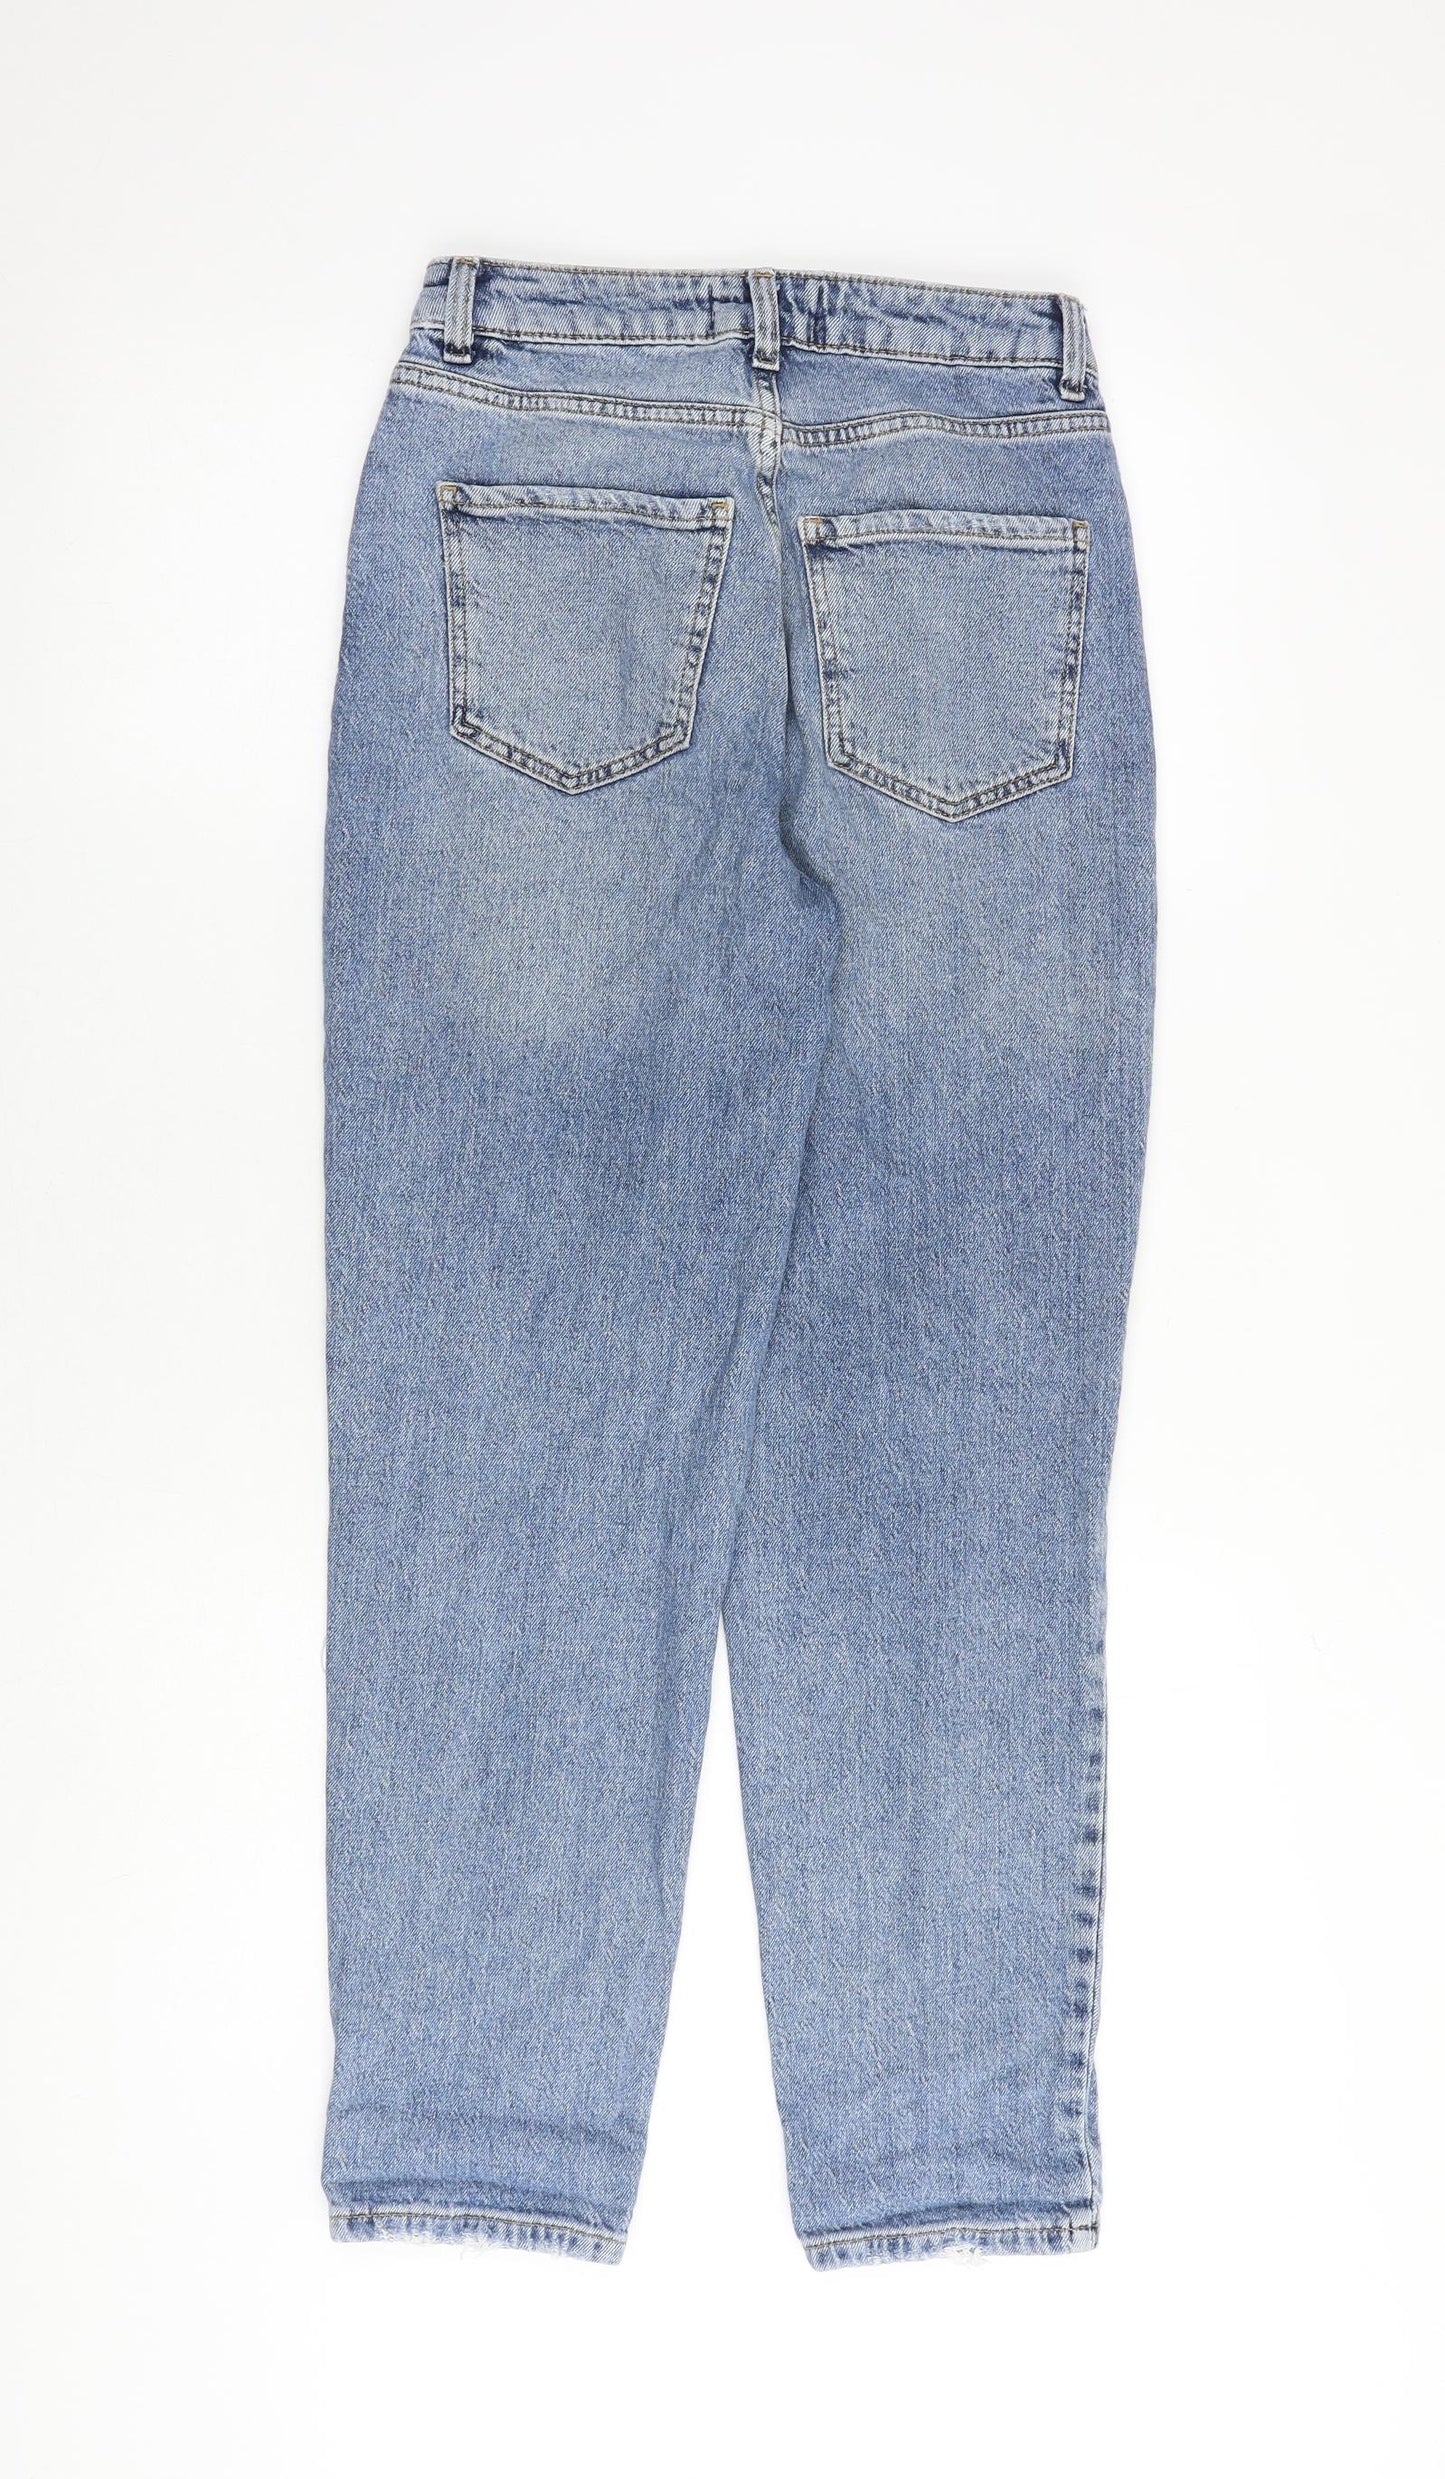 New Look Womens Blue Cotton Tapered Jeans Size 6 L27 in Regular Zip